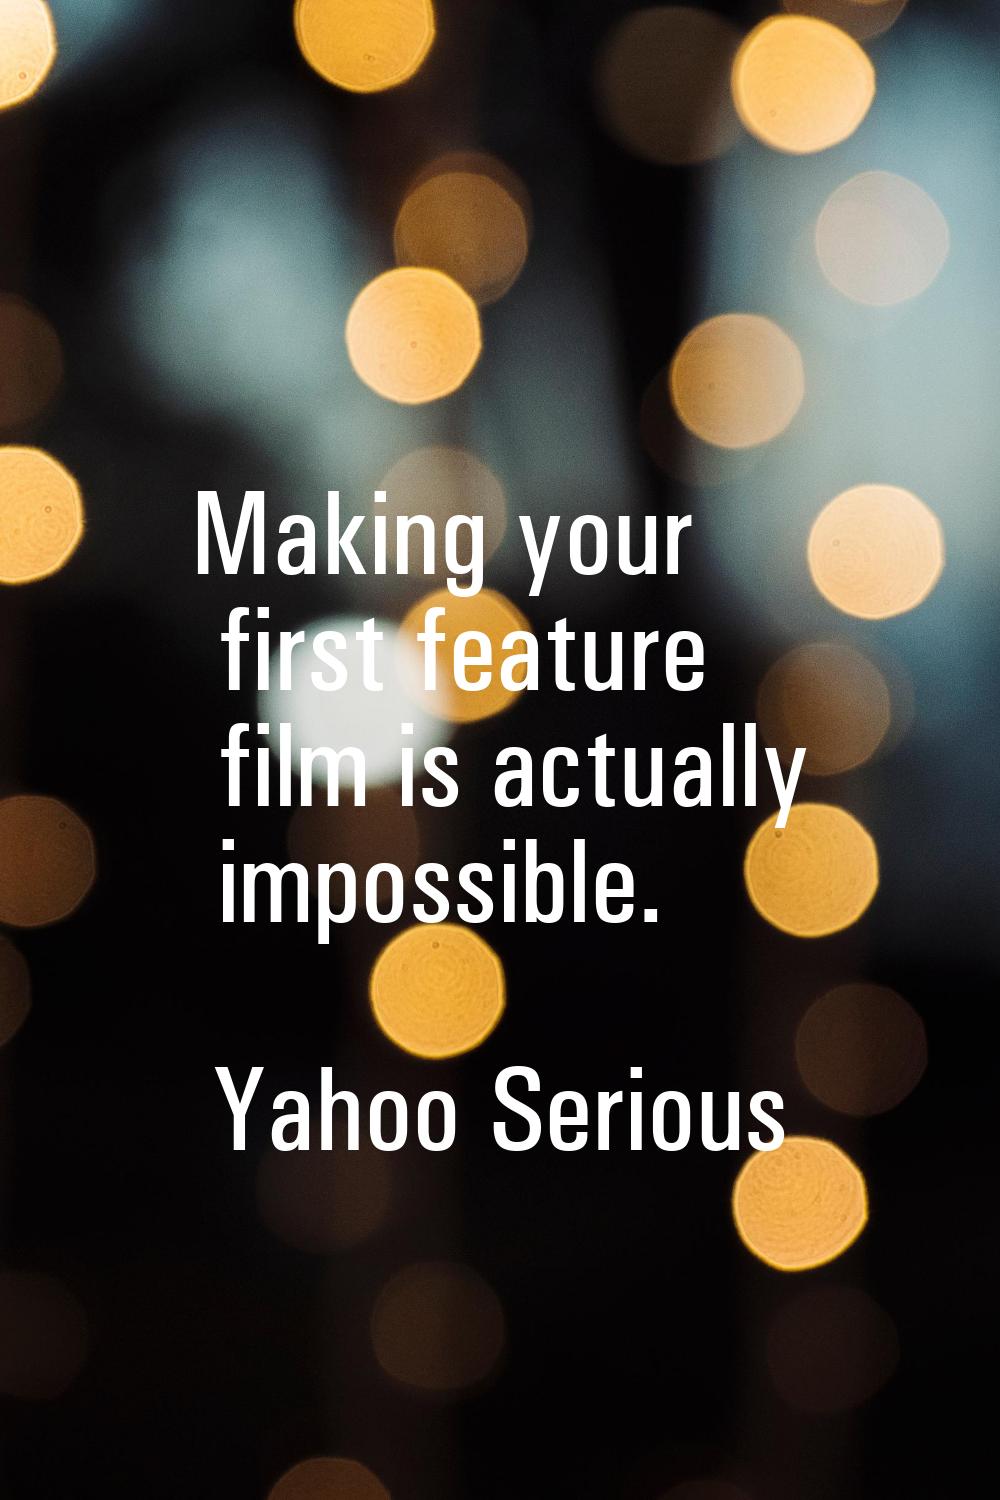 Making your first feature film is actually impossible.